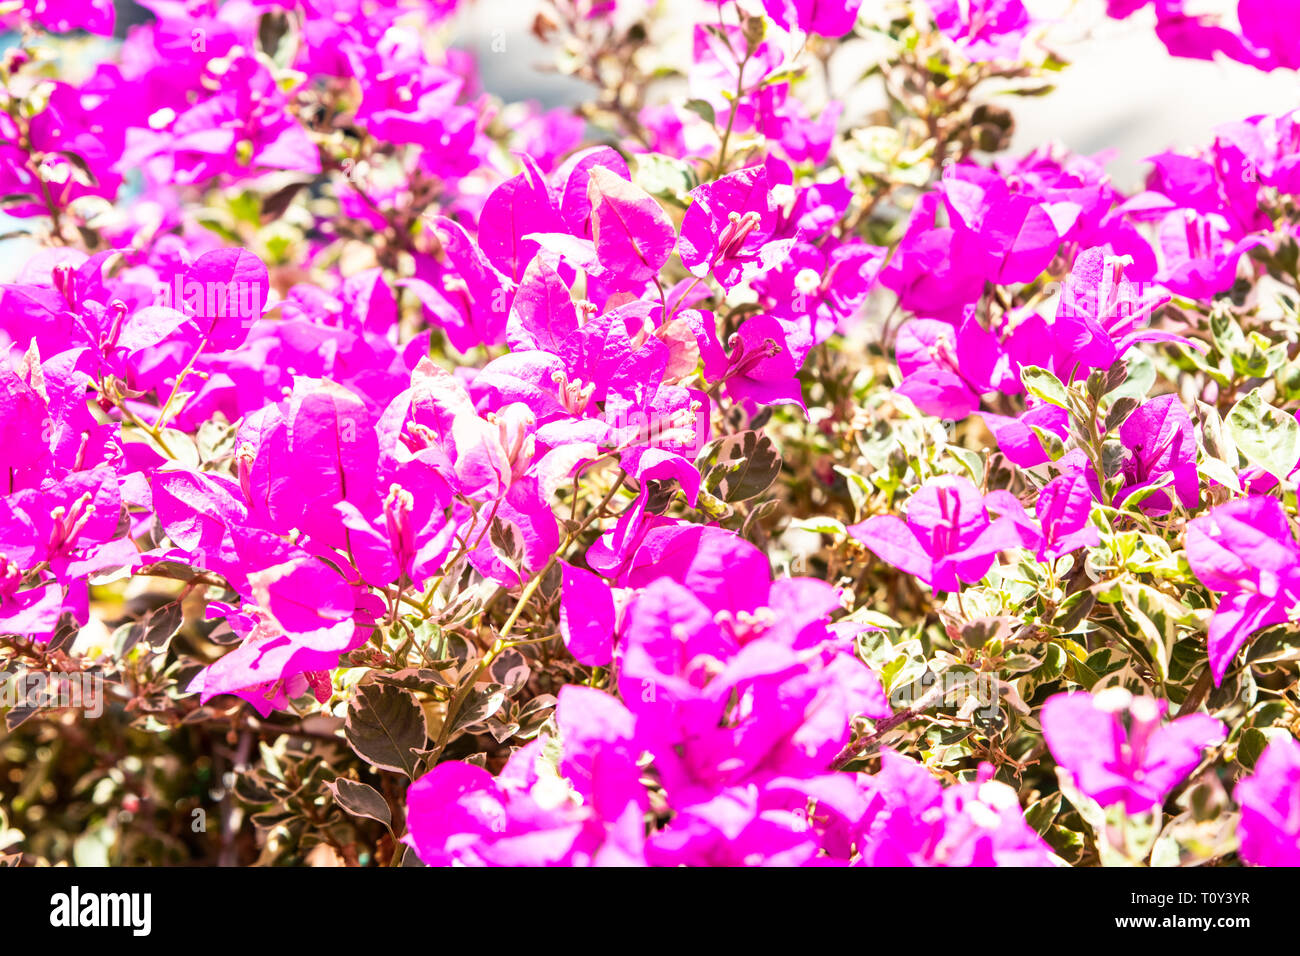 Tiny pink bush flowers in bloom. Closeup of tiny pink flowers in bloom. Stock Photo